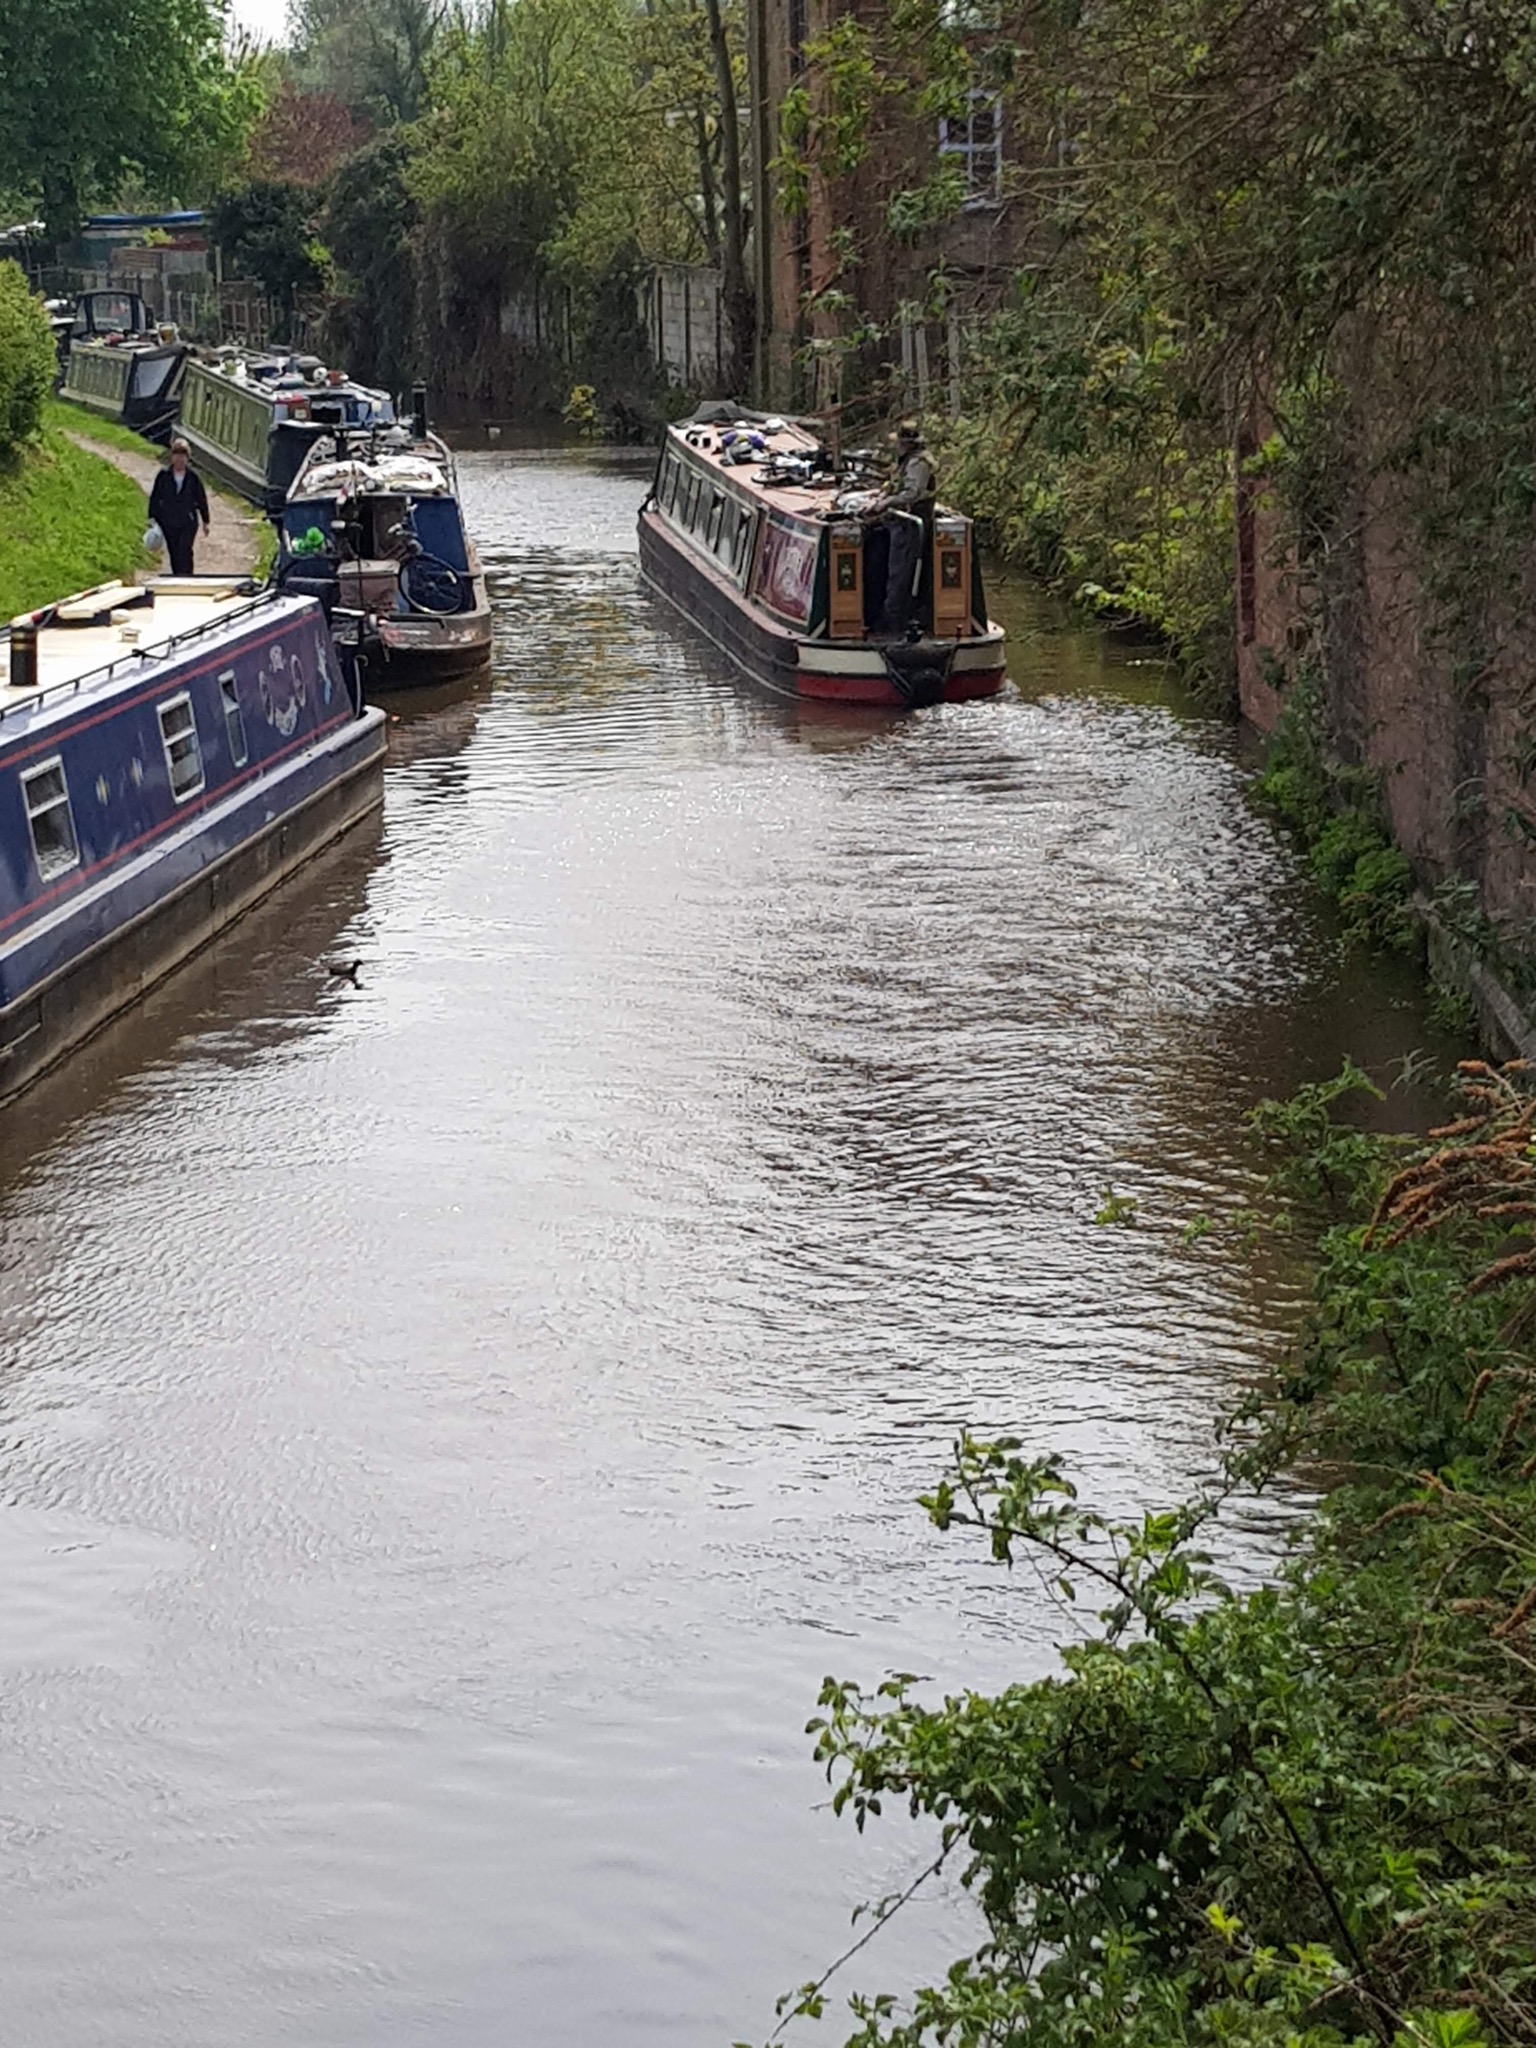 Life on the canals in the UK